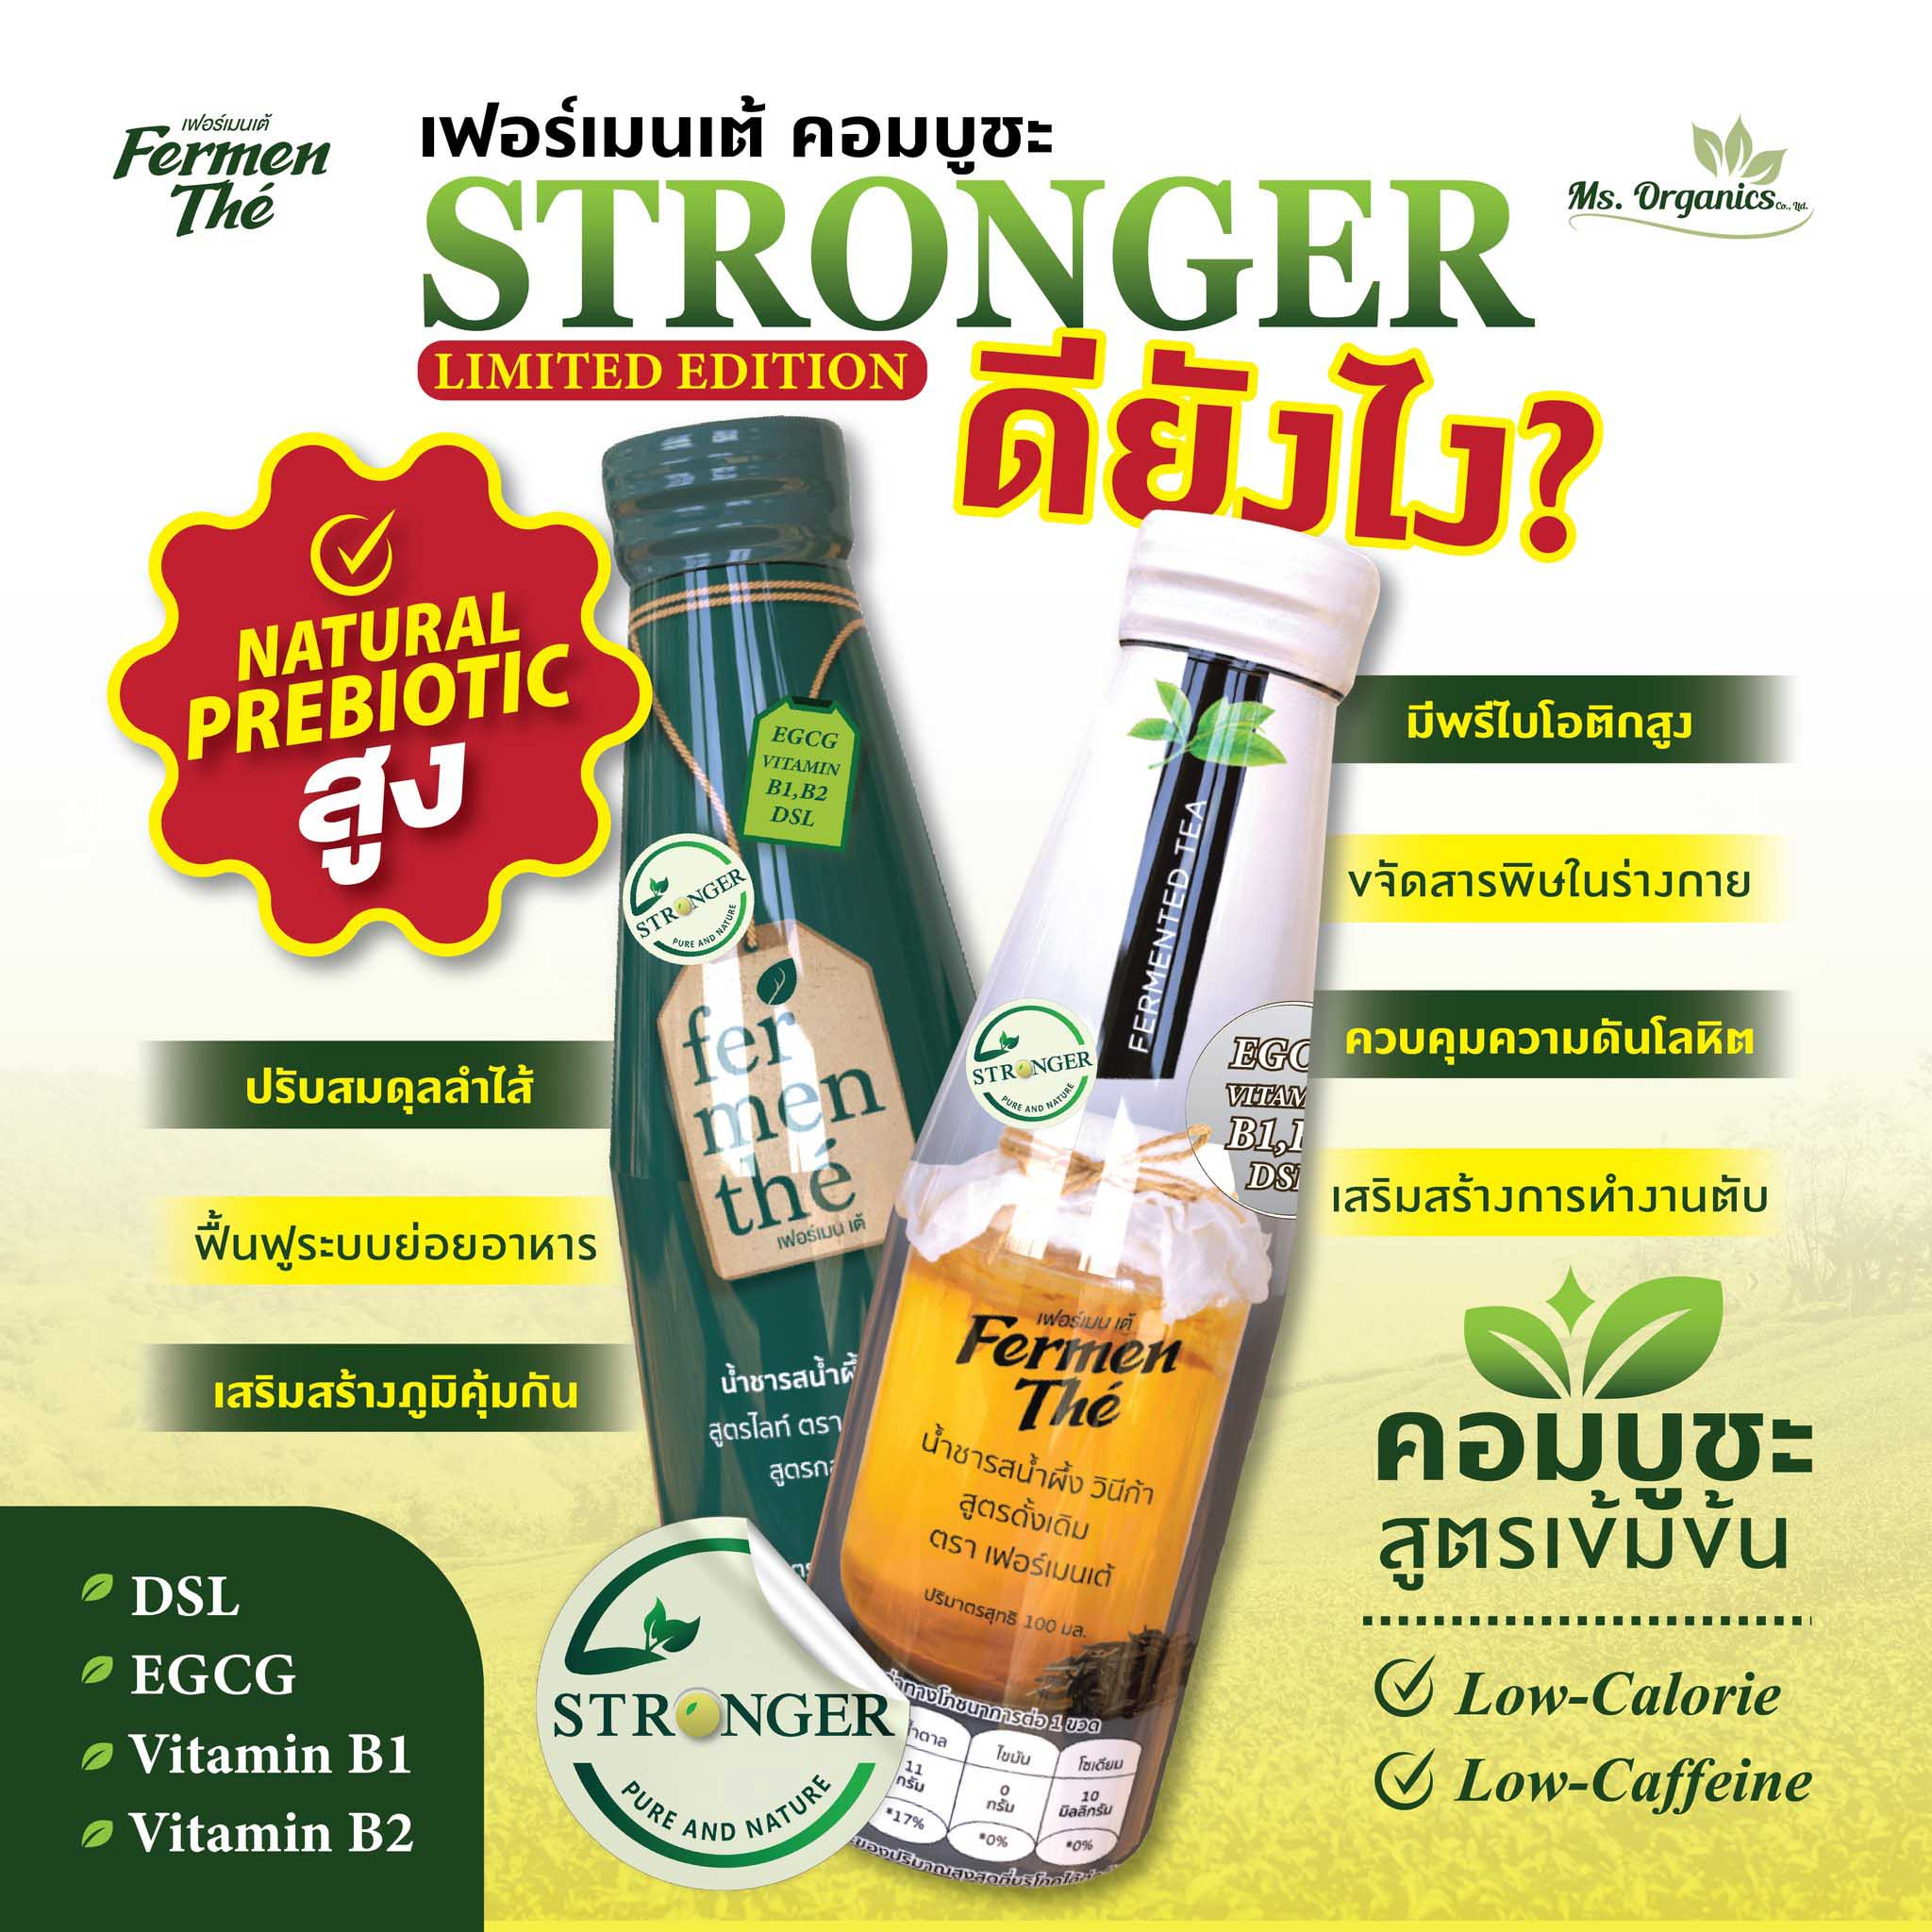 Fermenthe Stronger (Limited Edition) 5 กล่อง